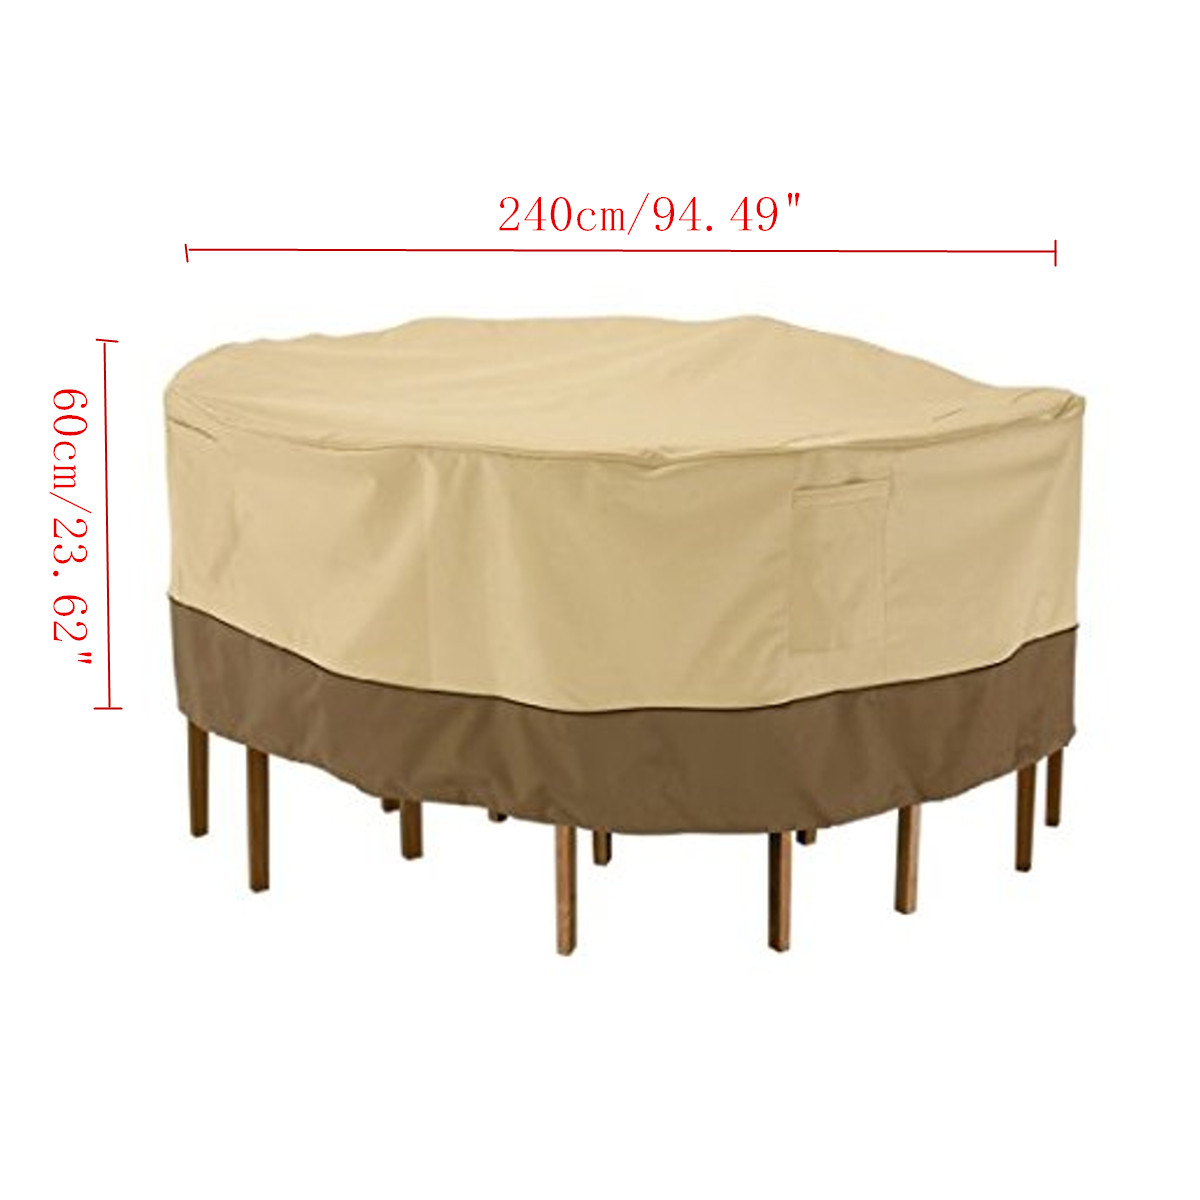 Garden Round Waterproof Table Cover Patio Outdoor Furniture Set Shelter Protection 5